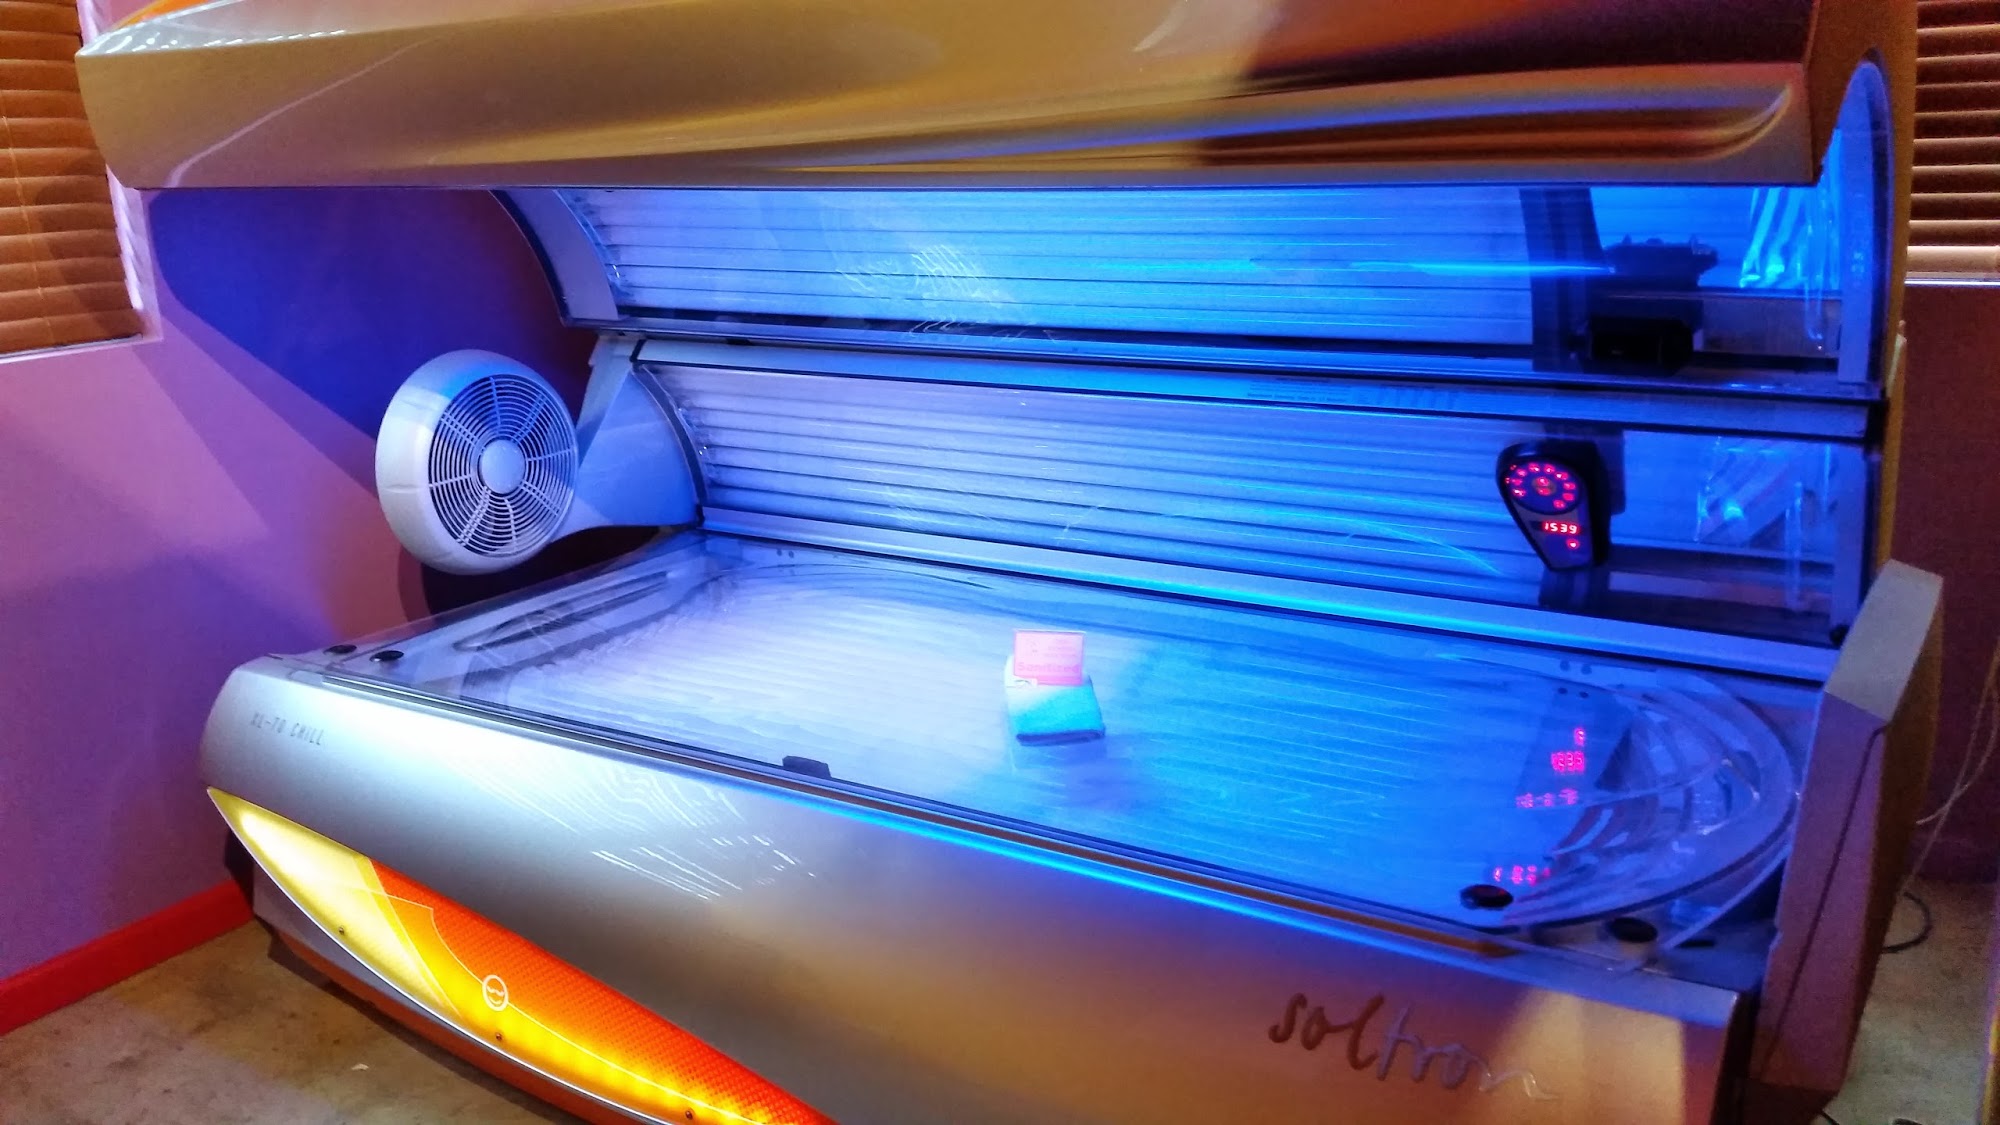 South Beach Tanning Company